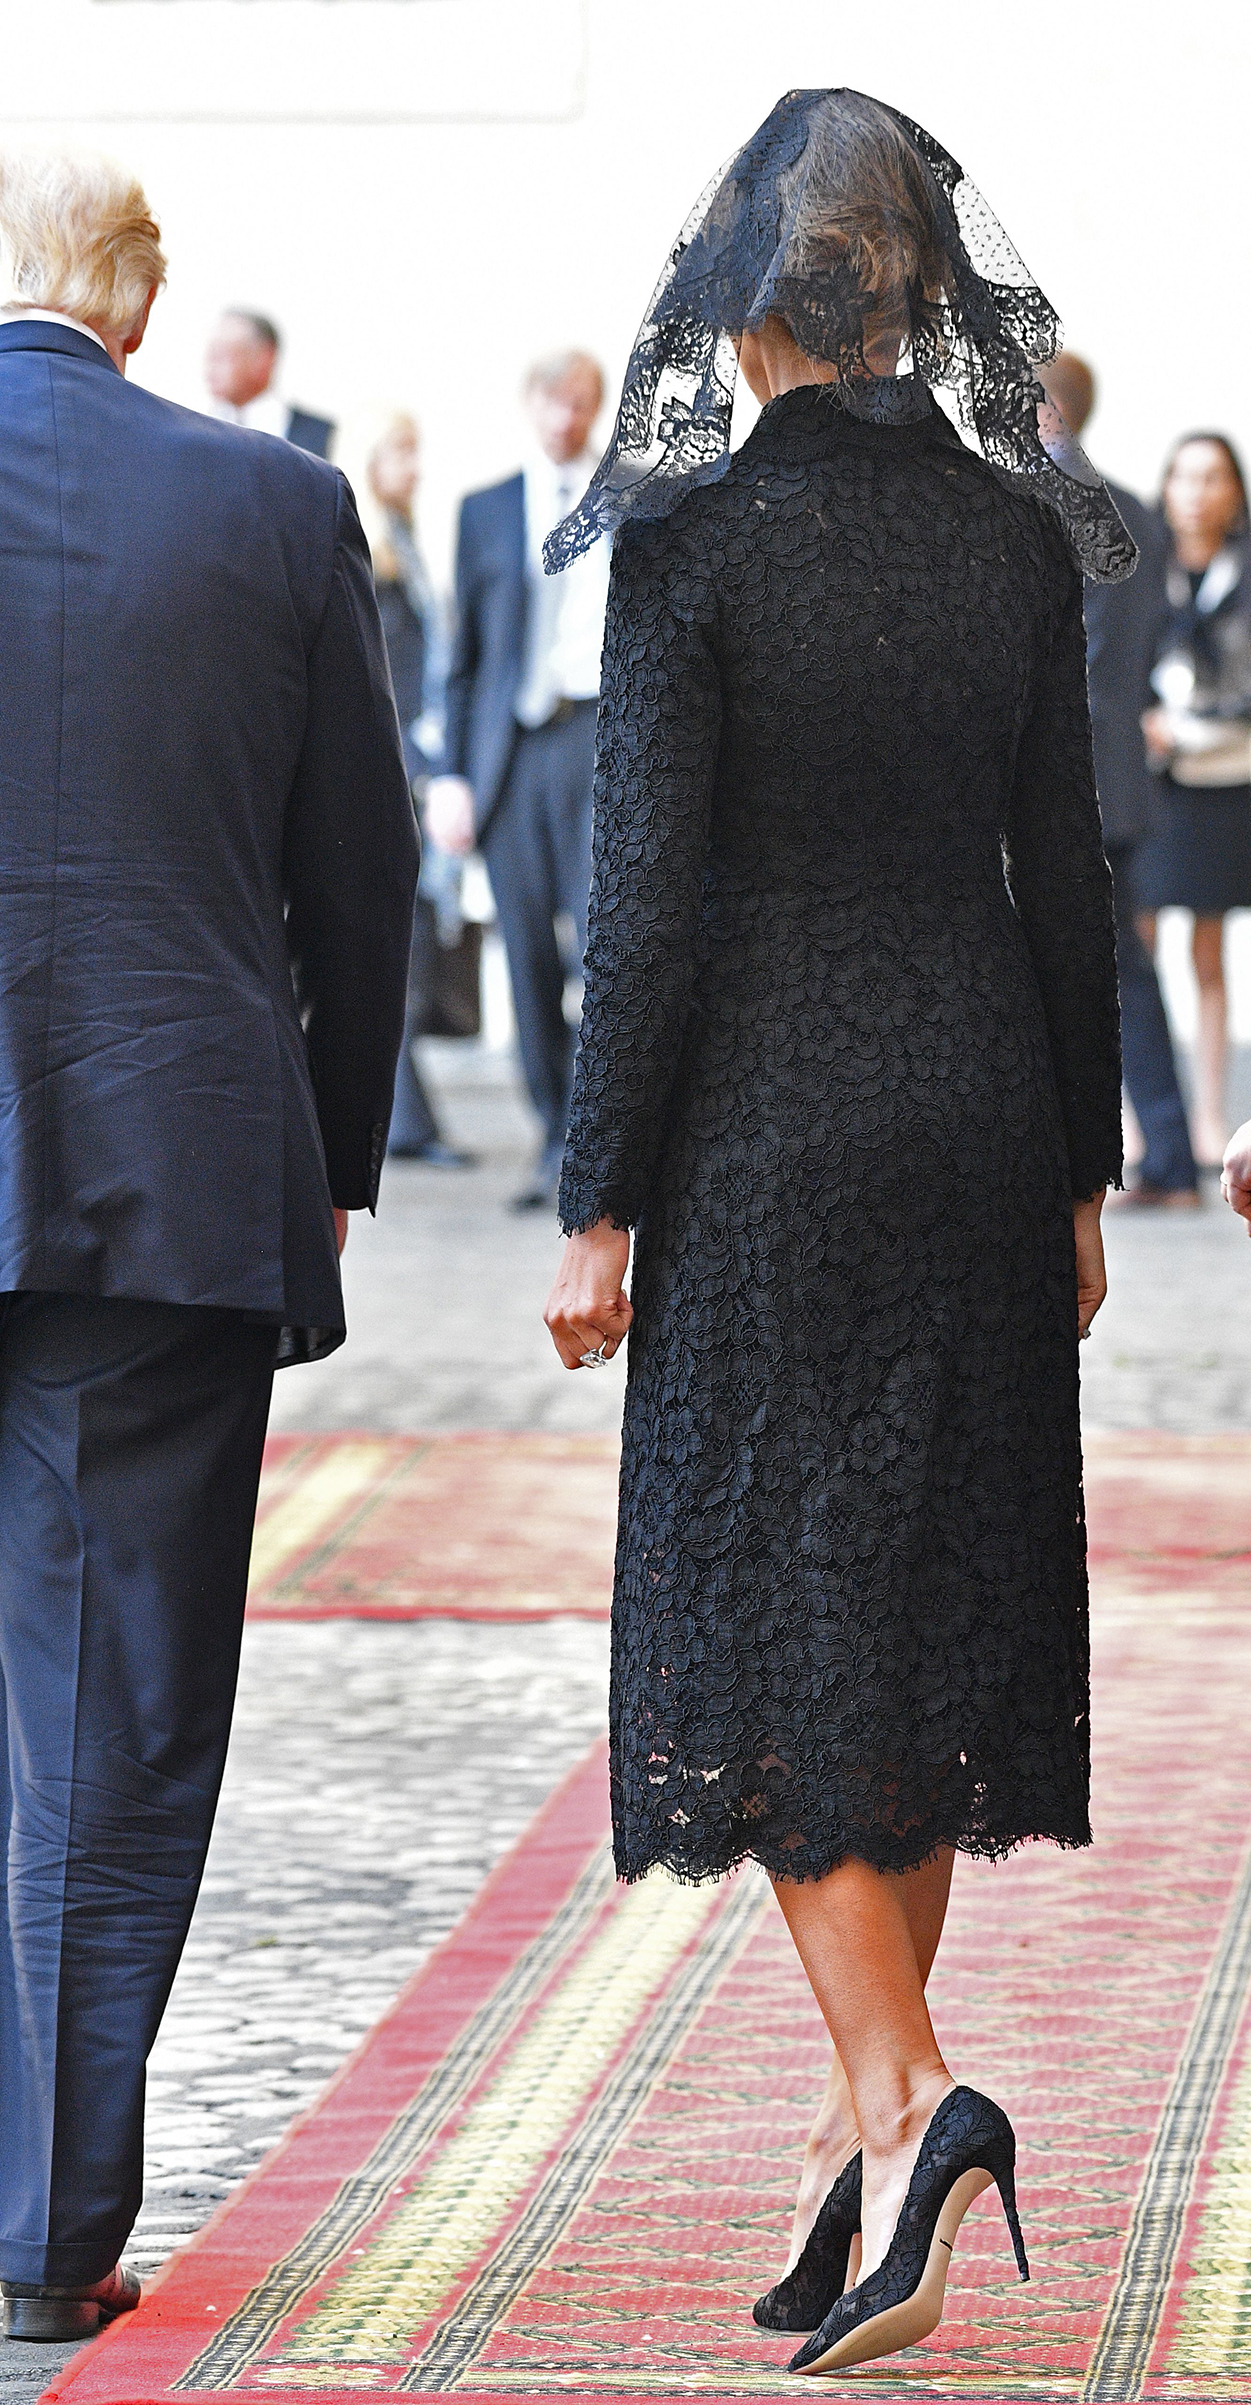 First lady Melania Trump wearing a Dolce & Gabbana outfit, arrives at the Vatican prior a private audience of US President Donald Trump (L) with Pope Francis, on May 24, 2017.